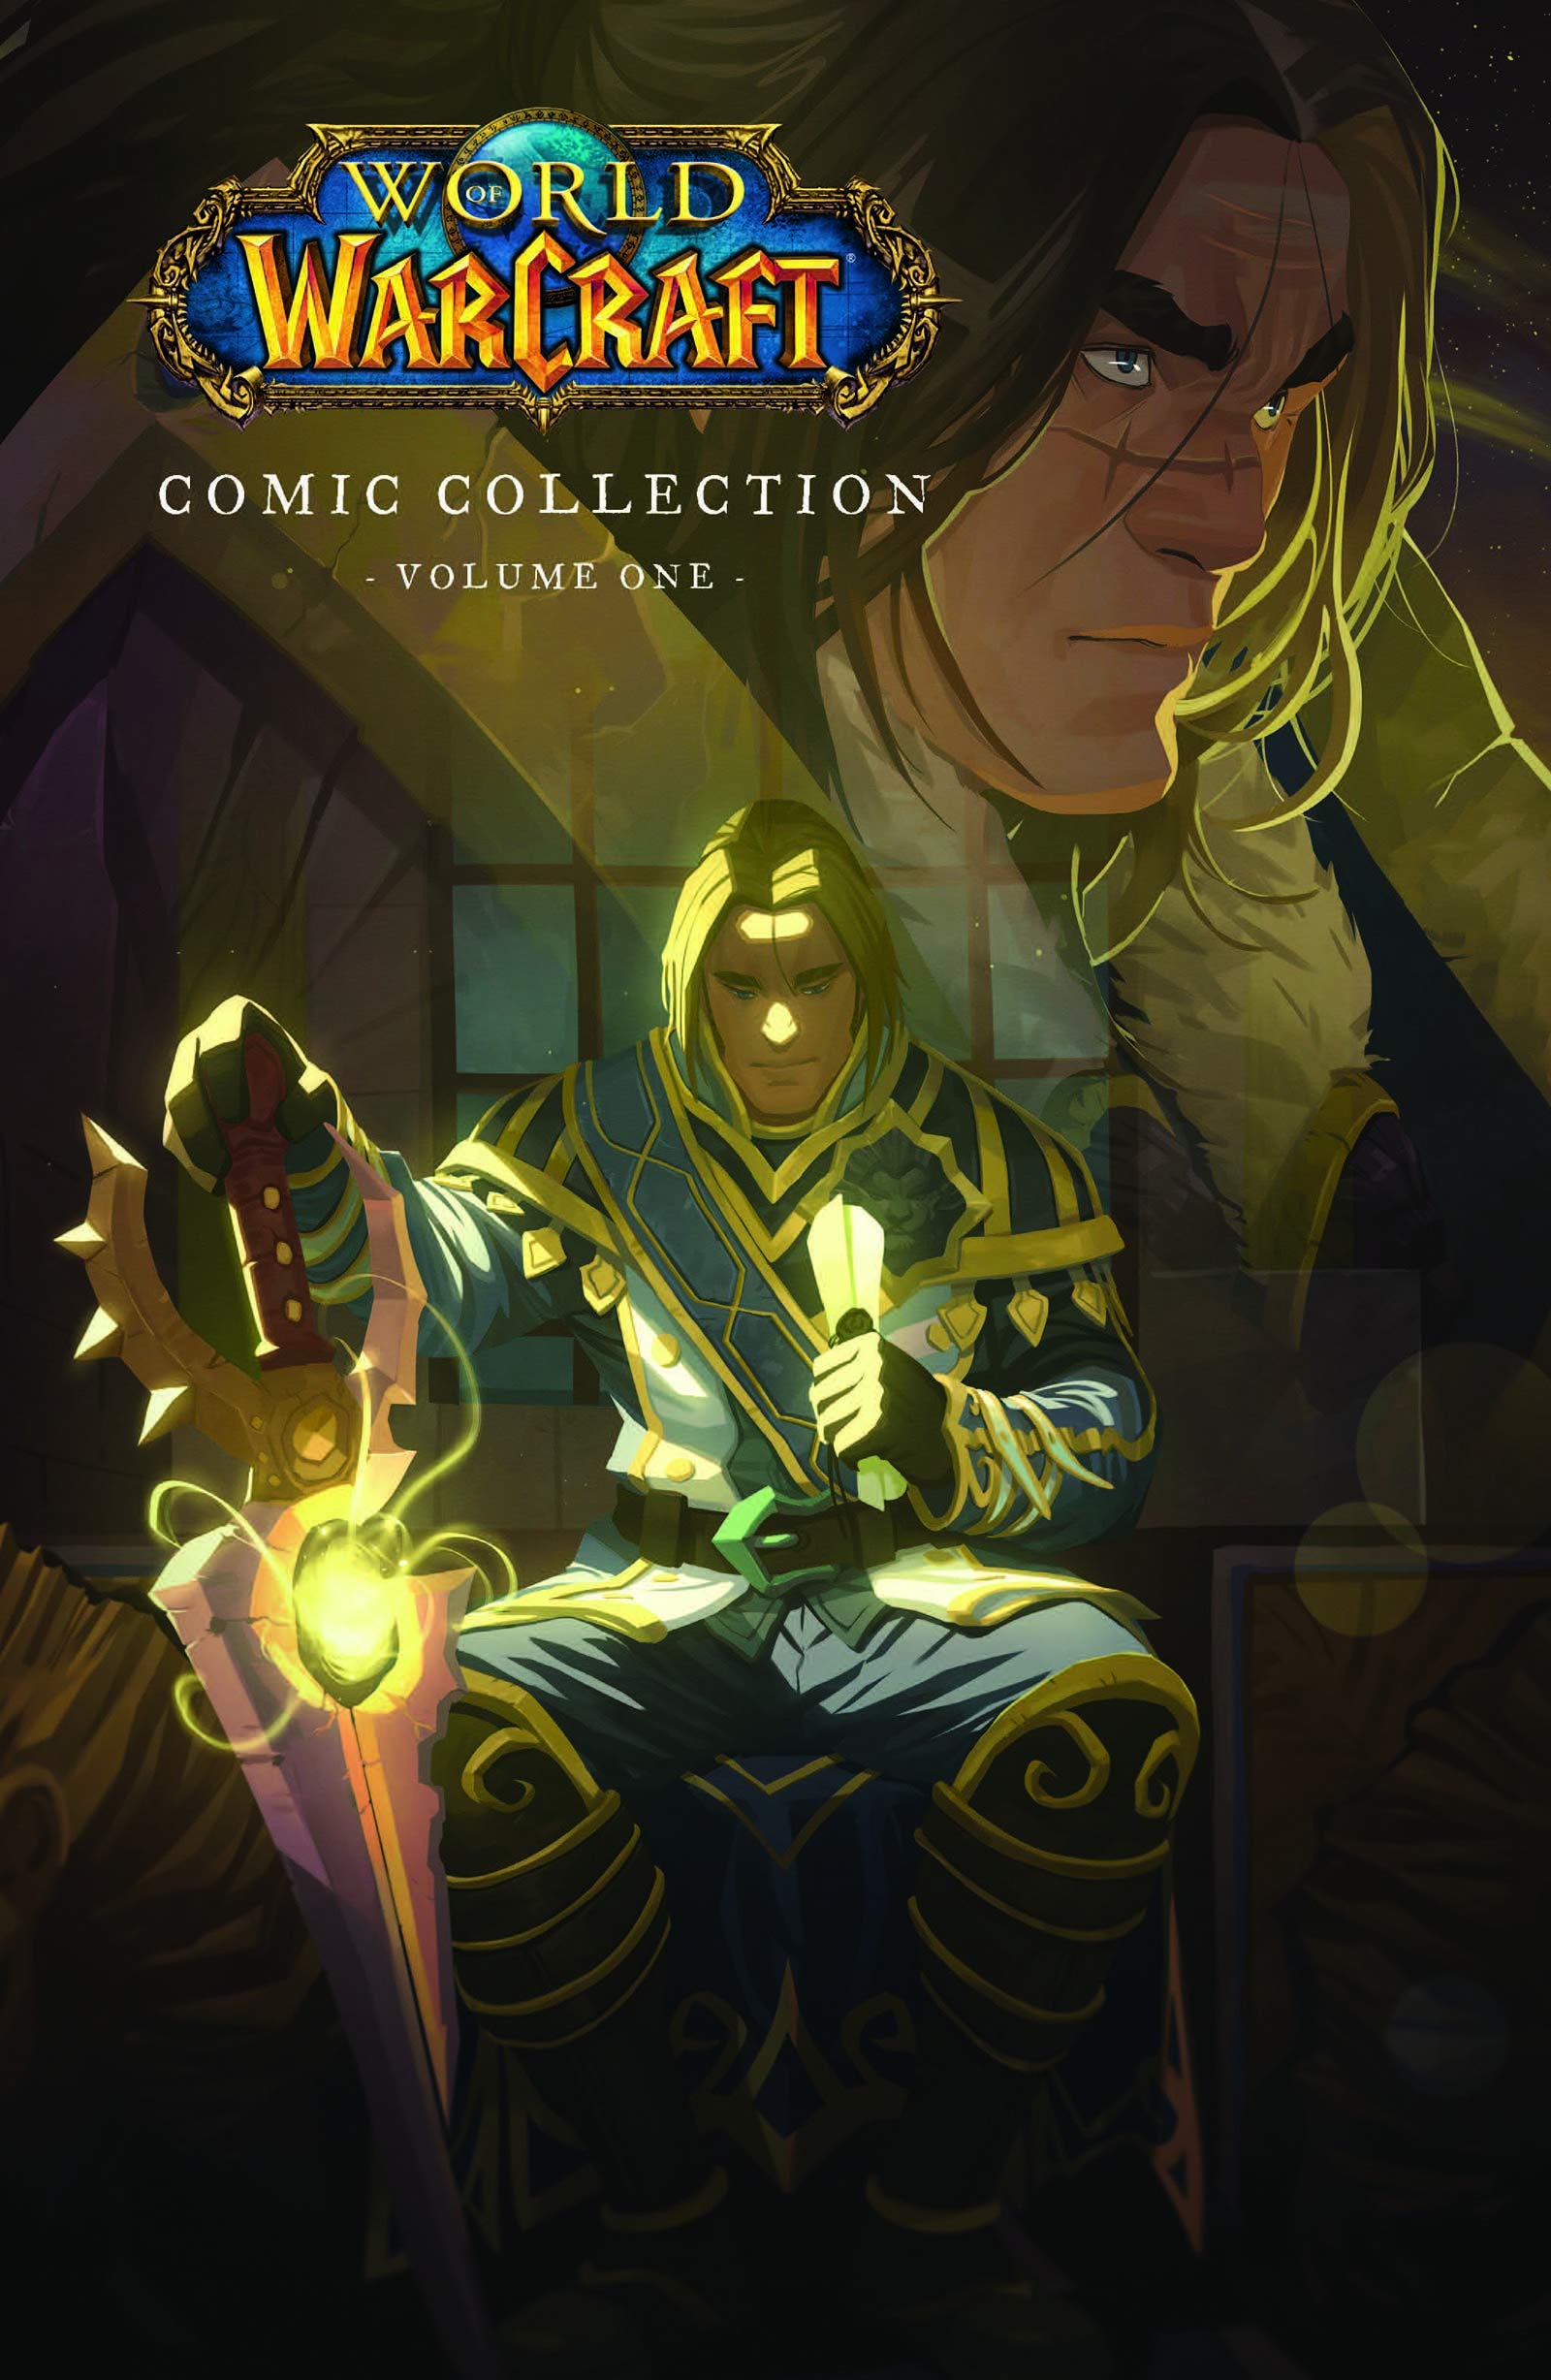 World of Warcraft: Comic Collection | Blizzard Entertainment Blizzard Entertainment